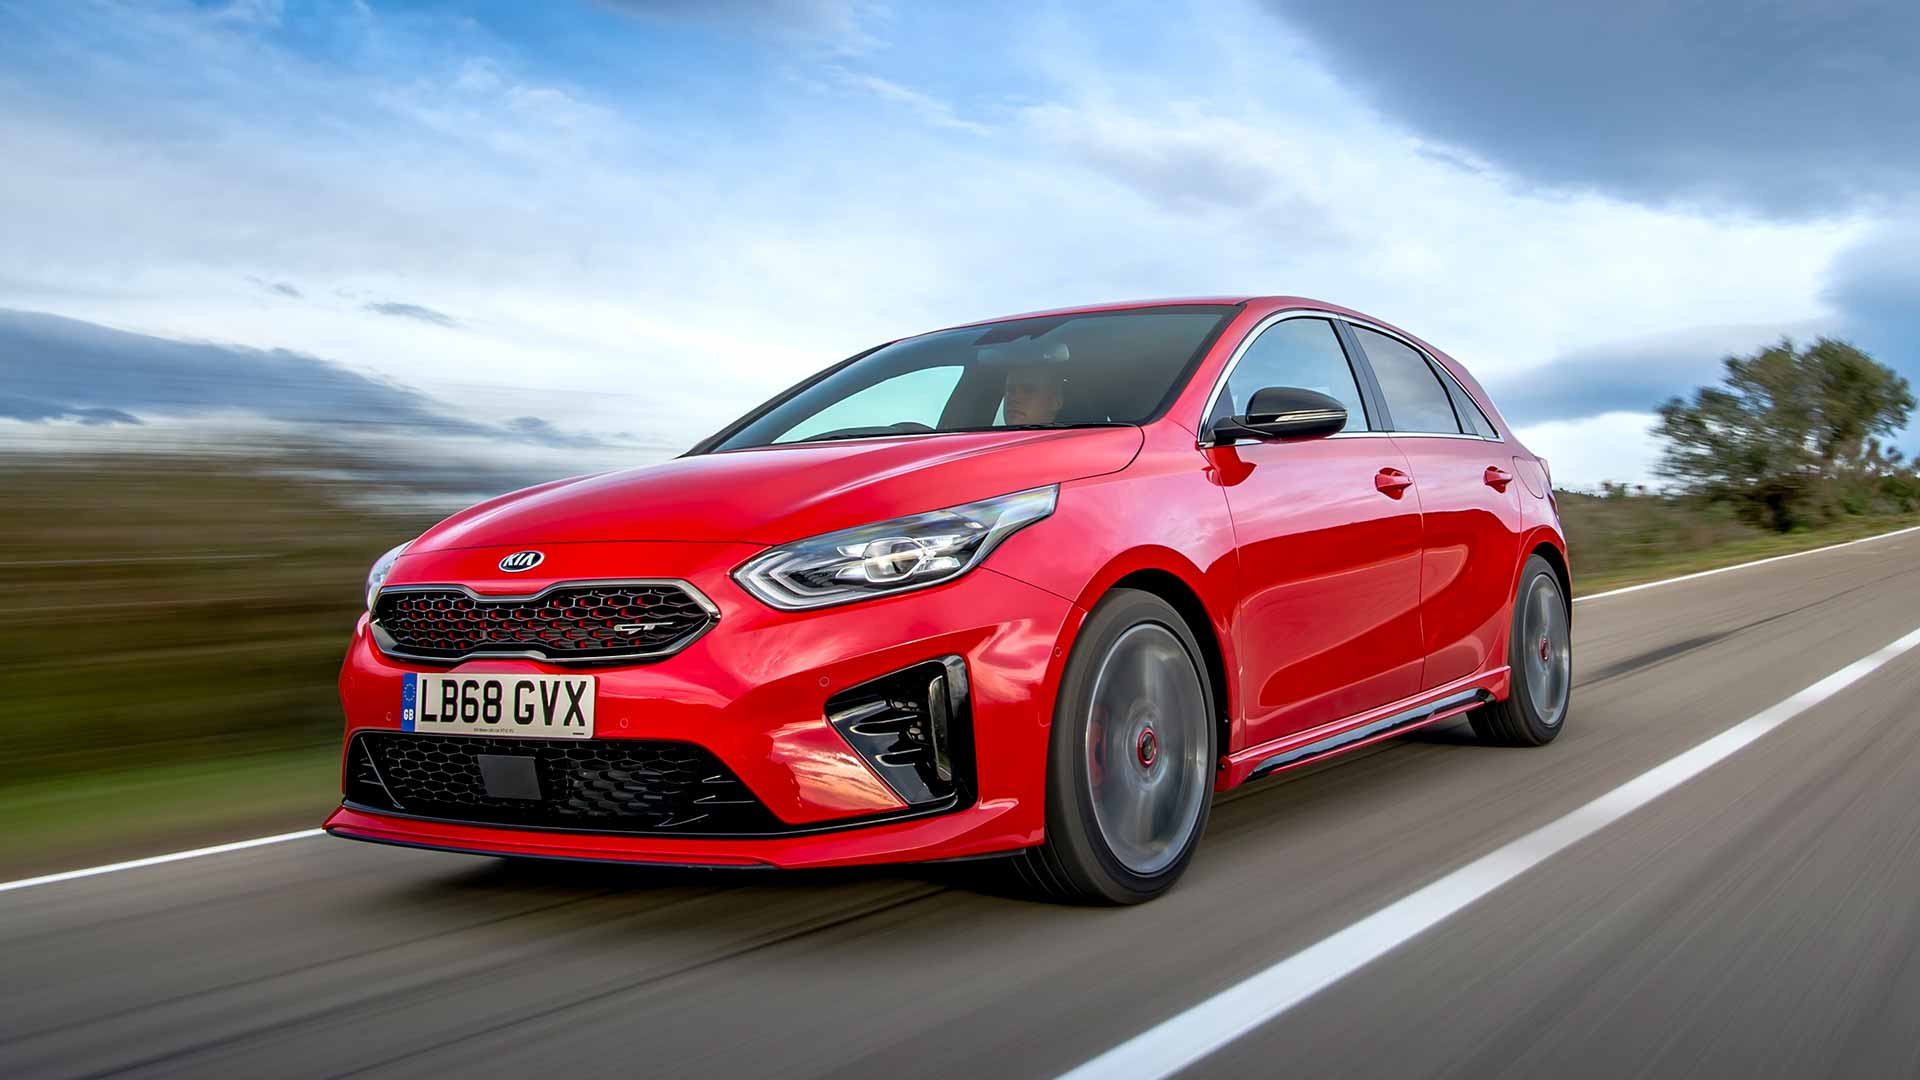 Kia Ceed review - Motoring Research